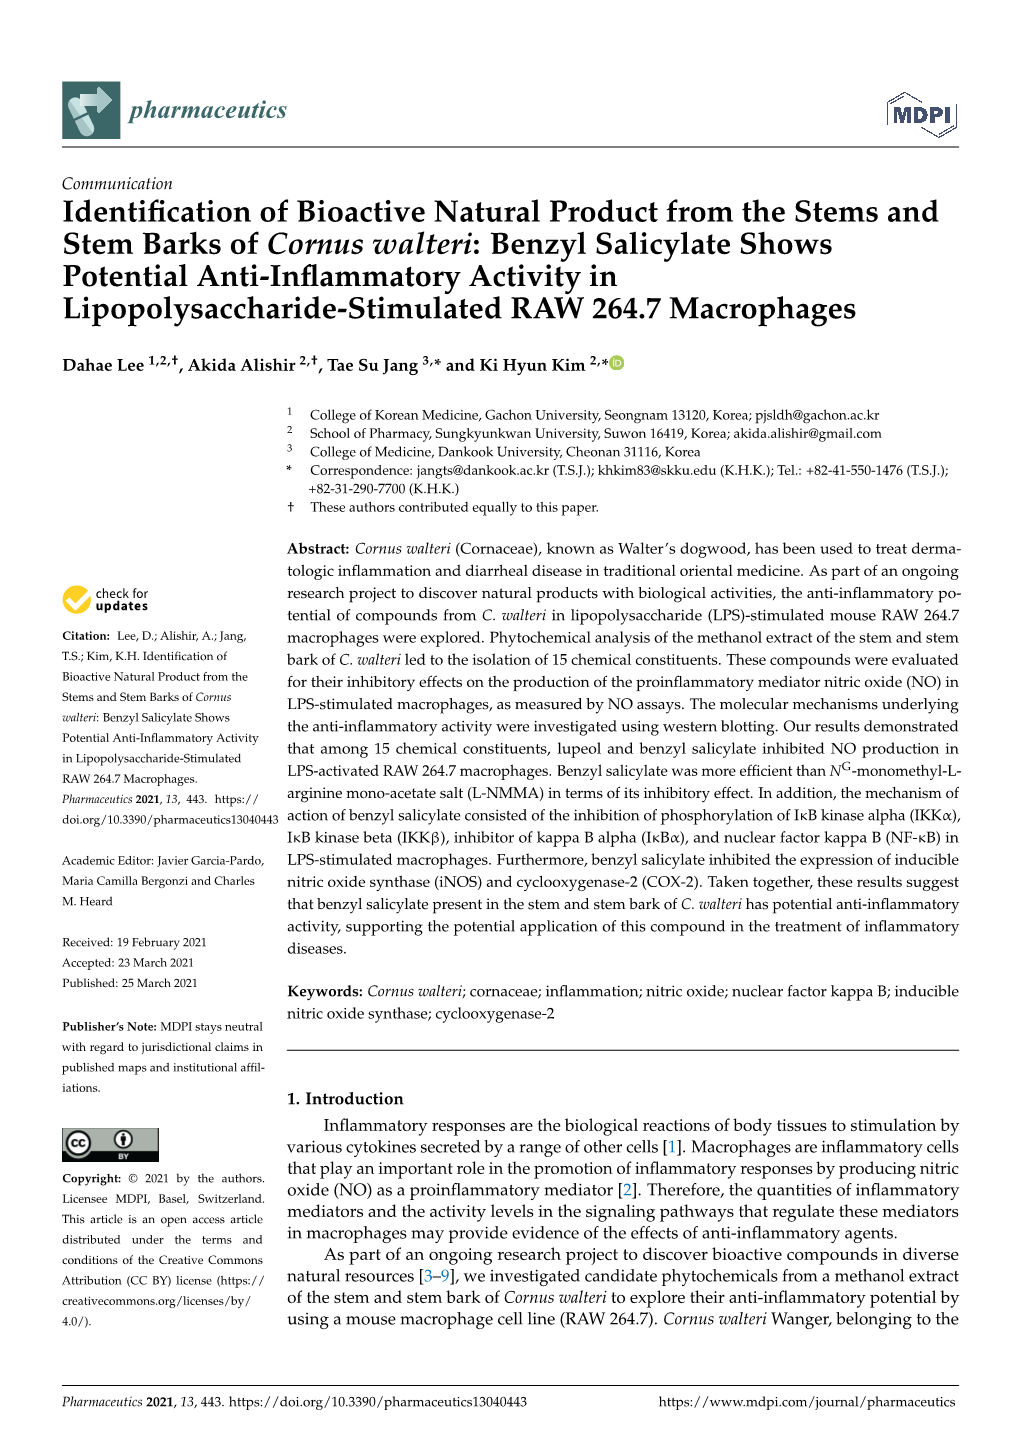 Identification of Bioactive Natural Product from the Stems and Stem Barks of Cornus Walteri: Benzyl Salicylate Shows Potential A